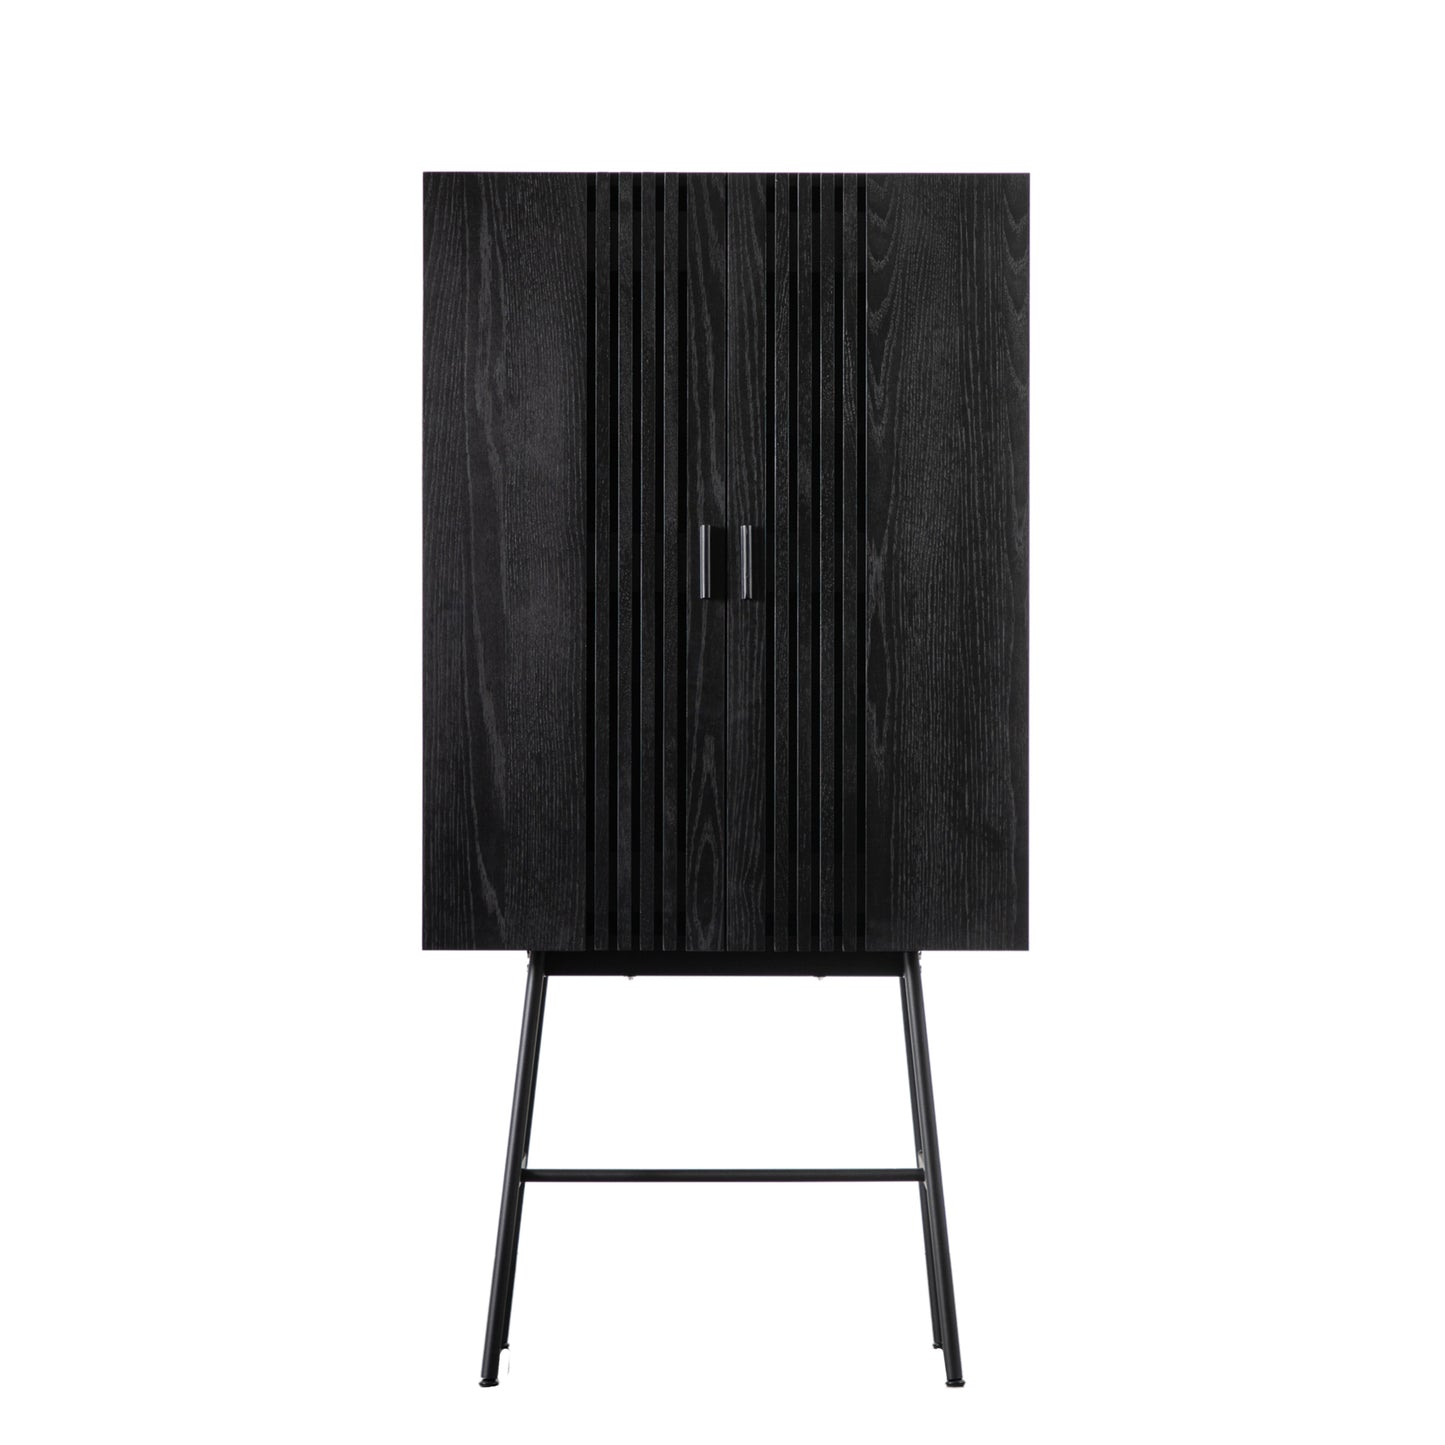 A Holston Drinks Cabinet Black 800x420x1600mm by Kikiathome.co.uk for interior decor.